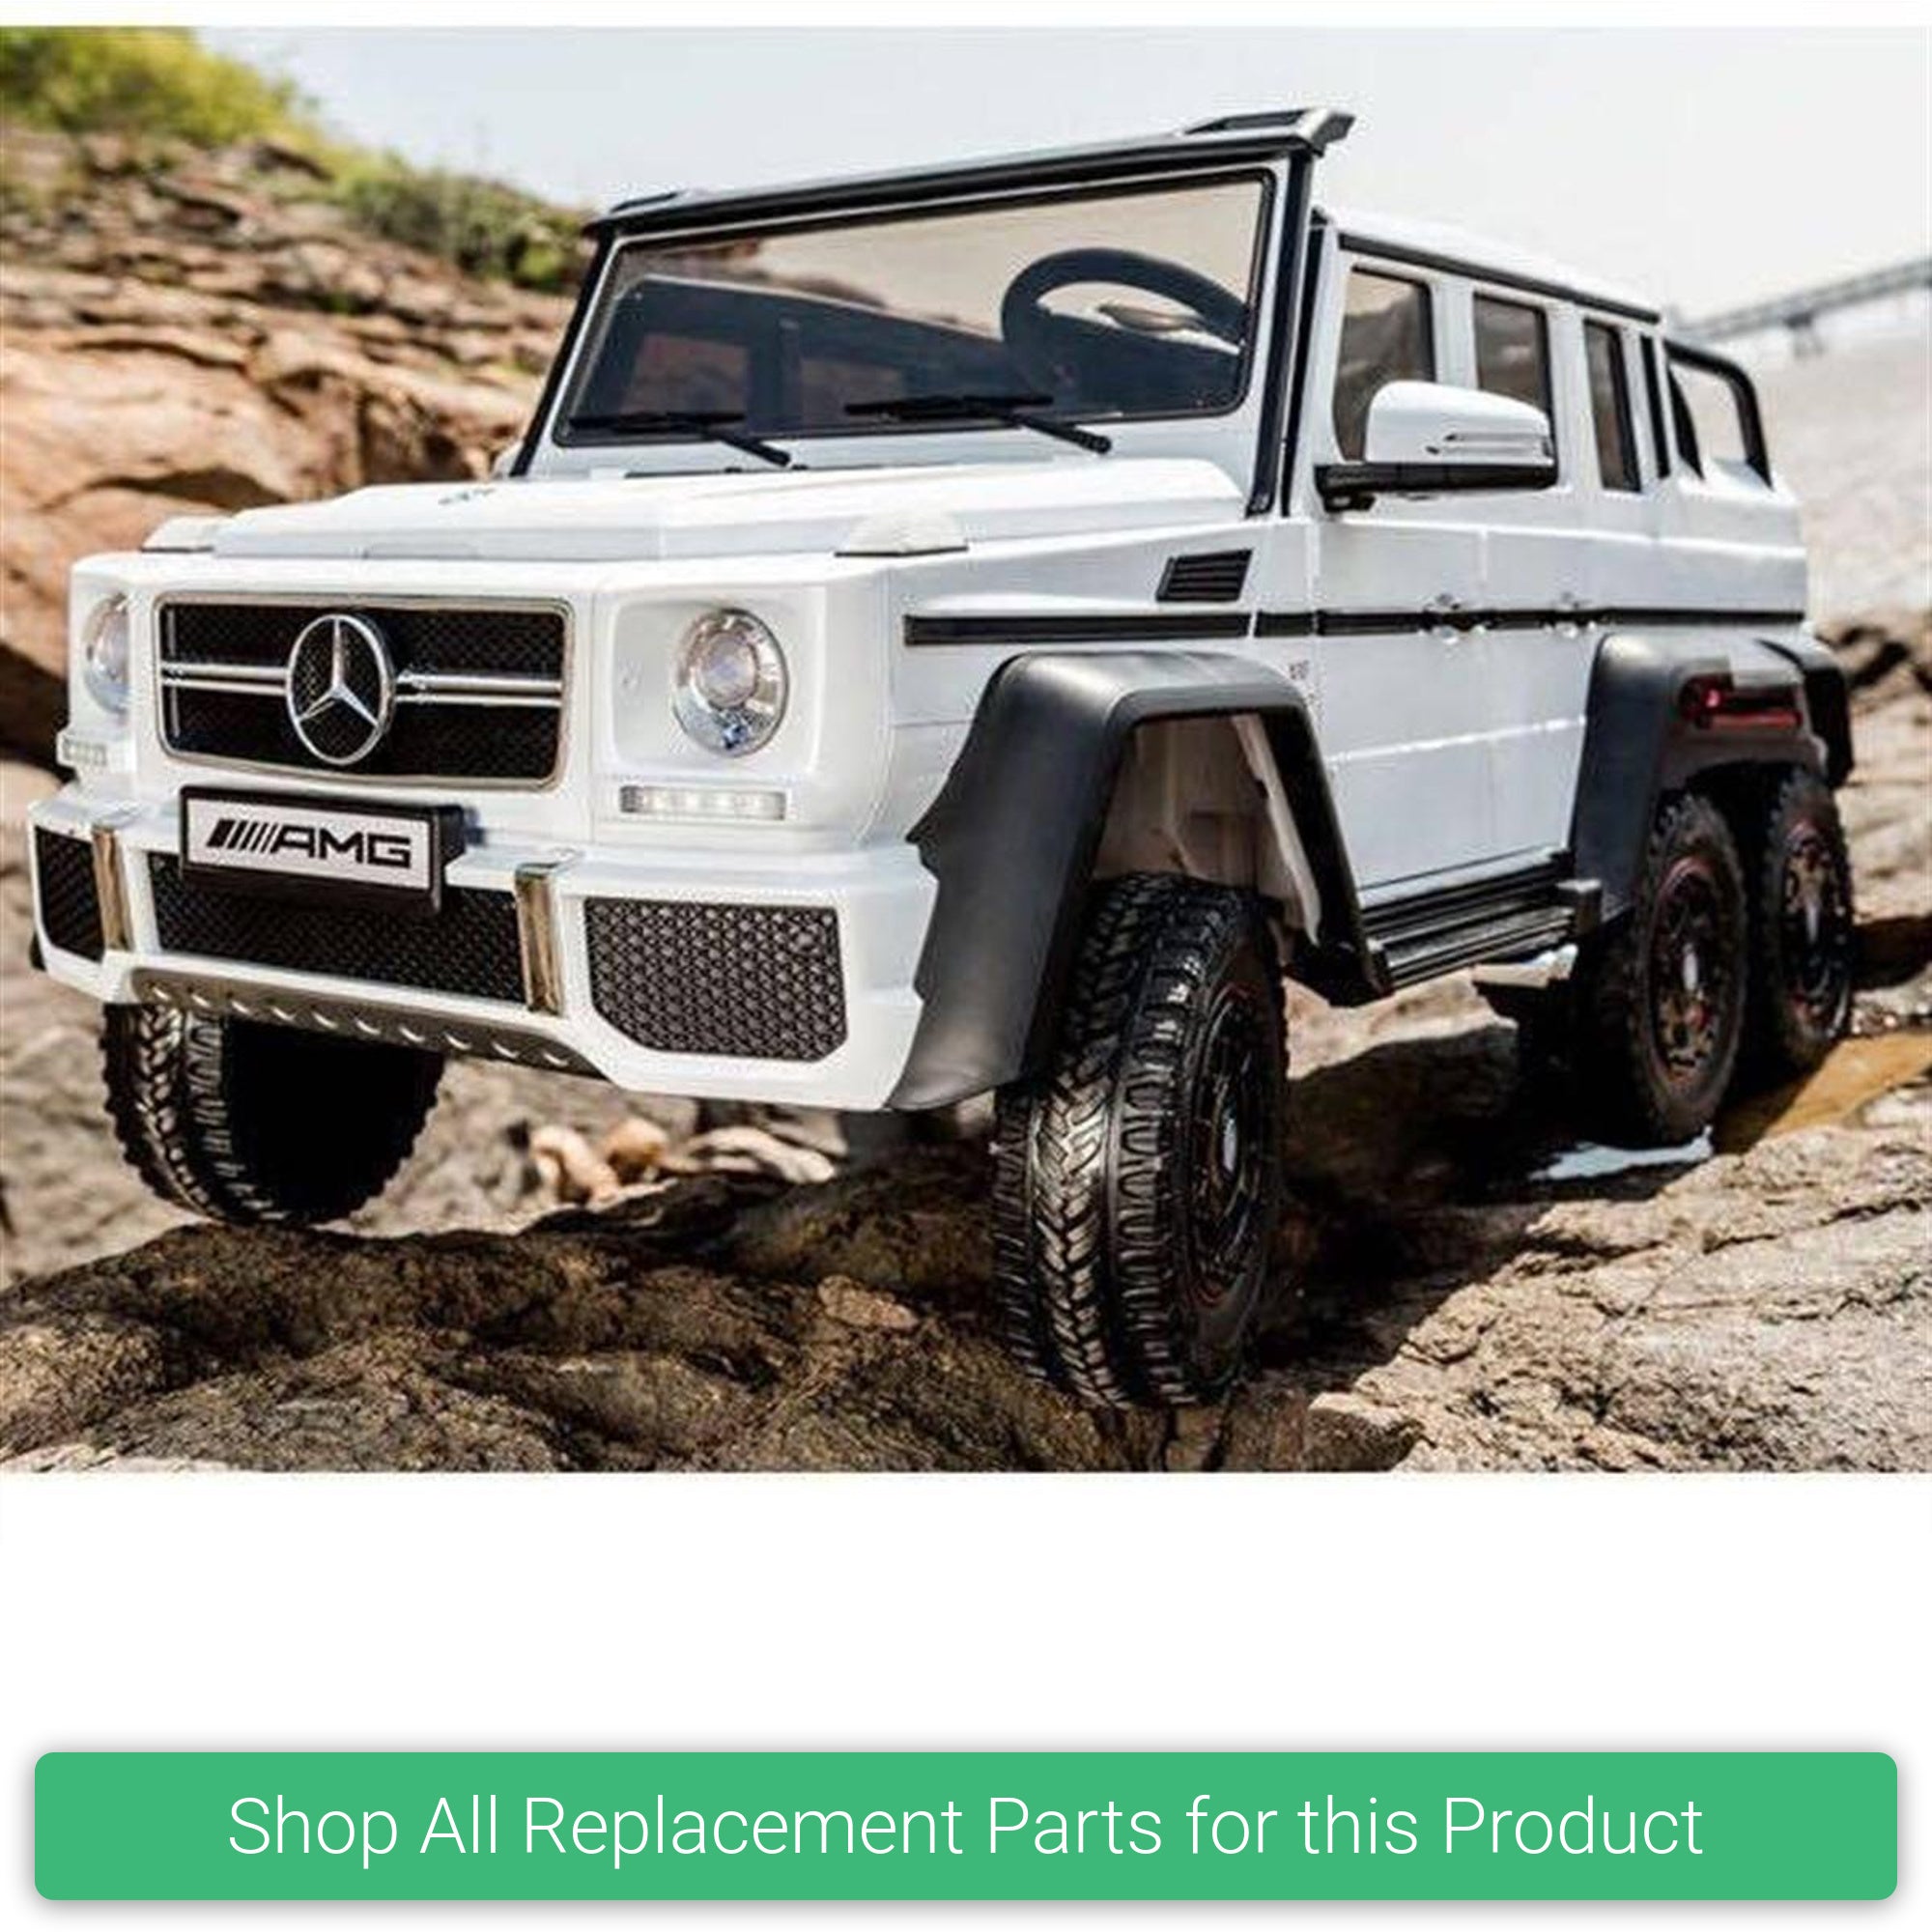 Replacement Parts and Spares for Kids Mercedes G63 6X6 - VAR-G63-6X6 - ABL1801 G63 6X6